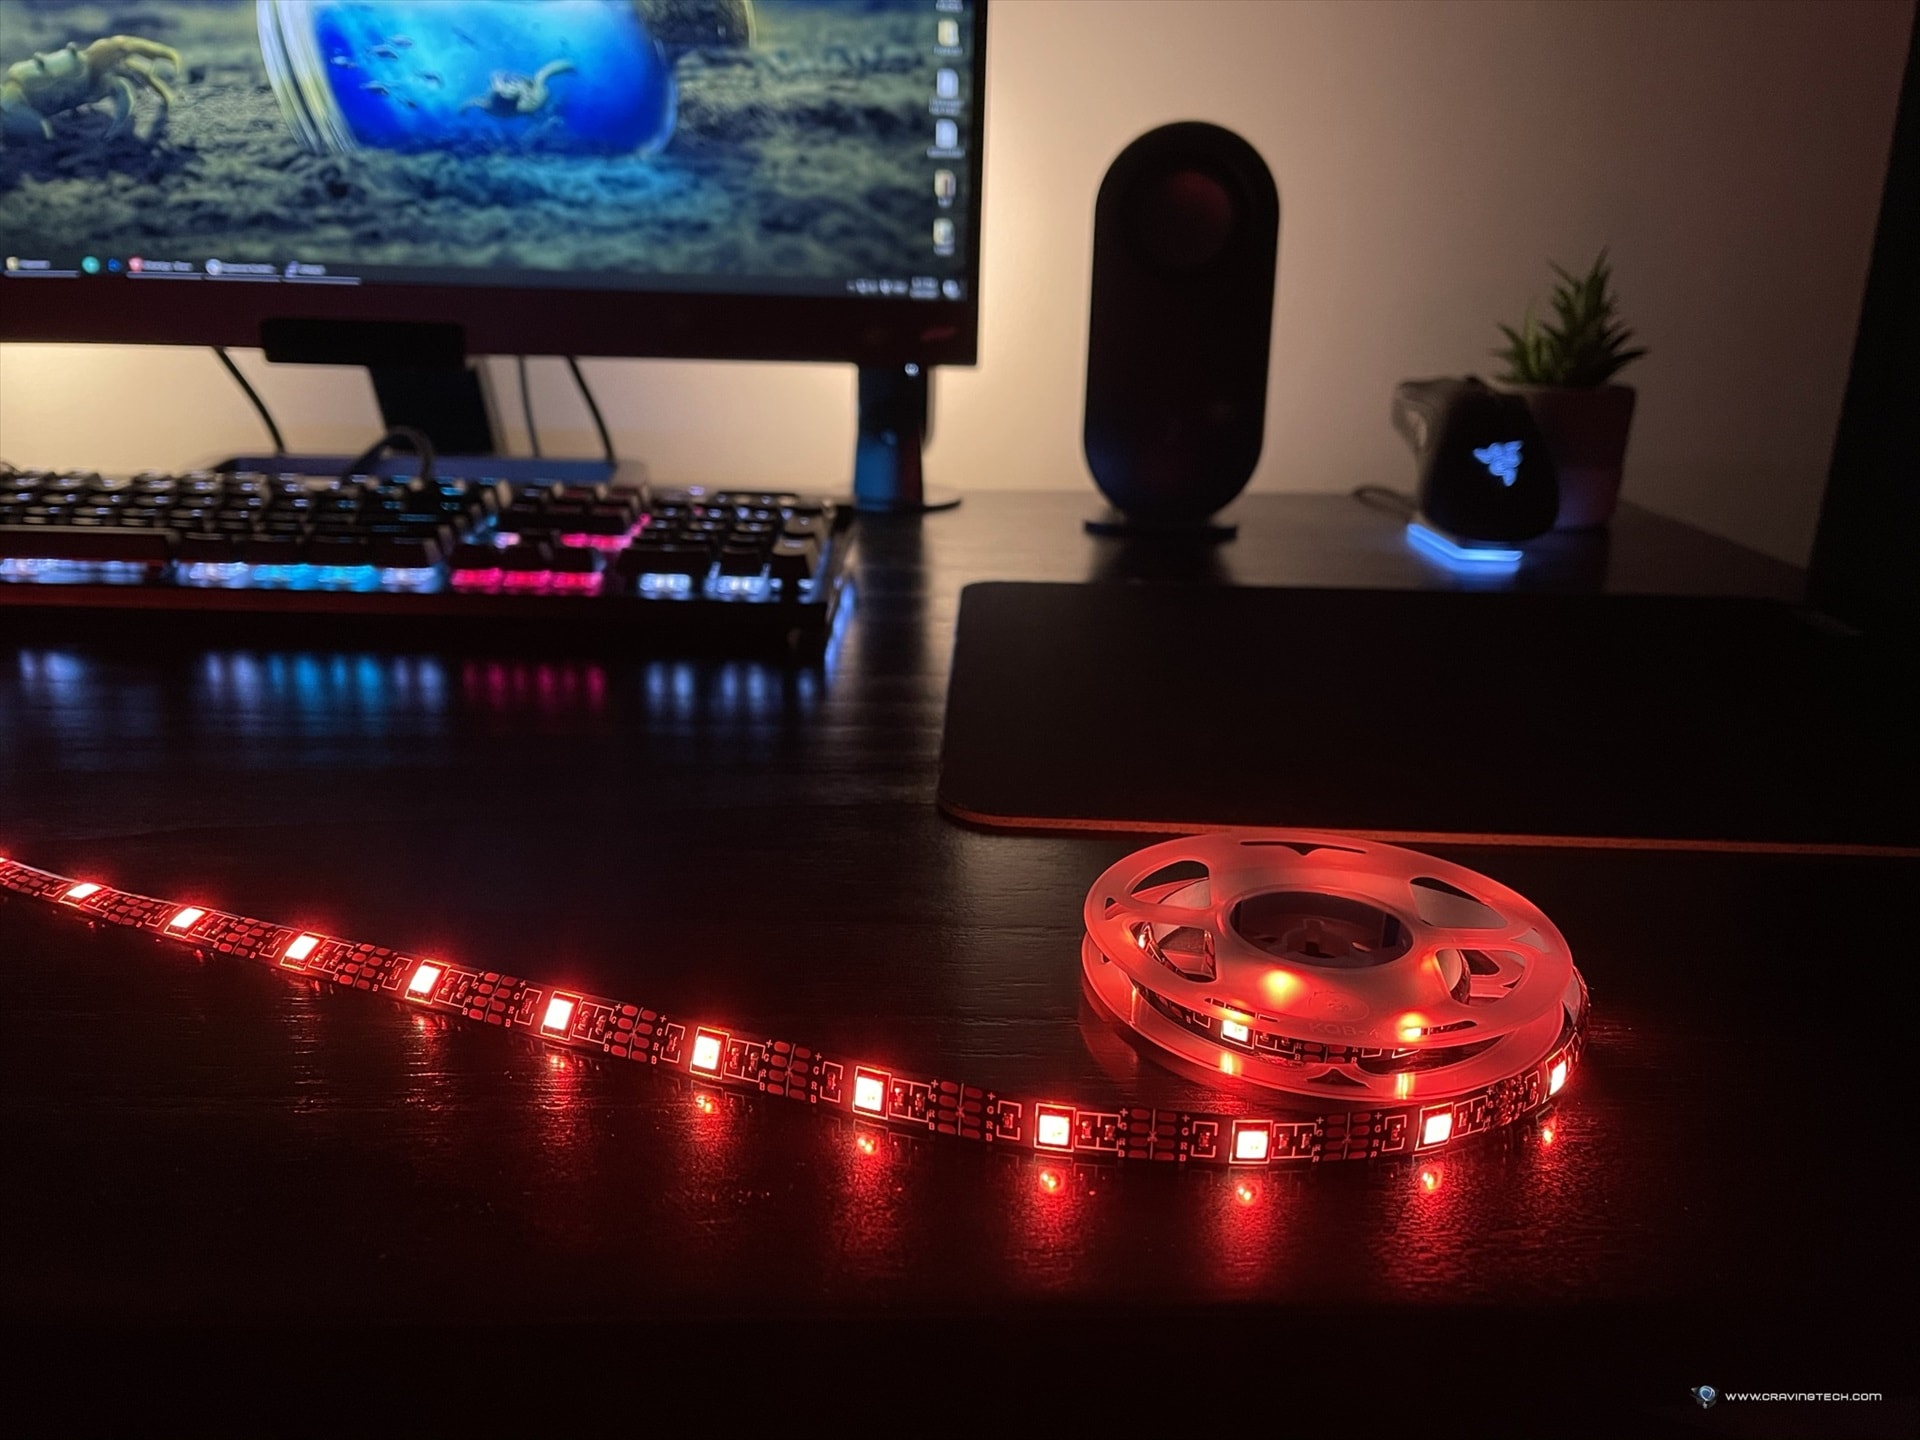 Enhance the mood anywhere with these Connect Smart Fairy Lights & Strip Light